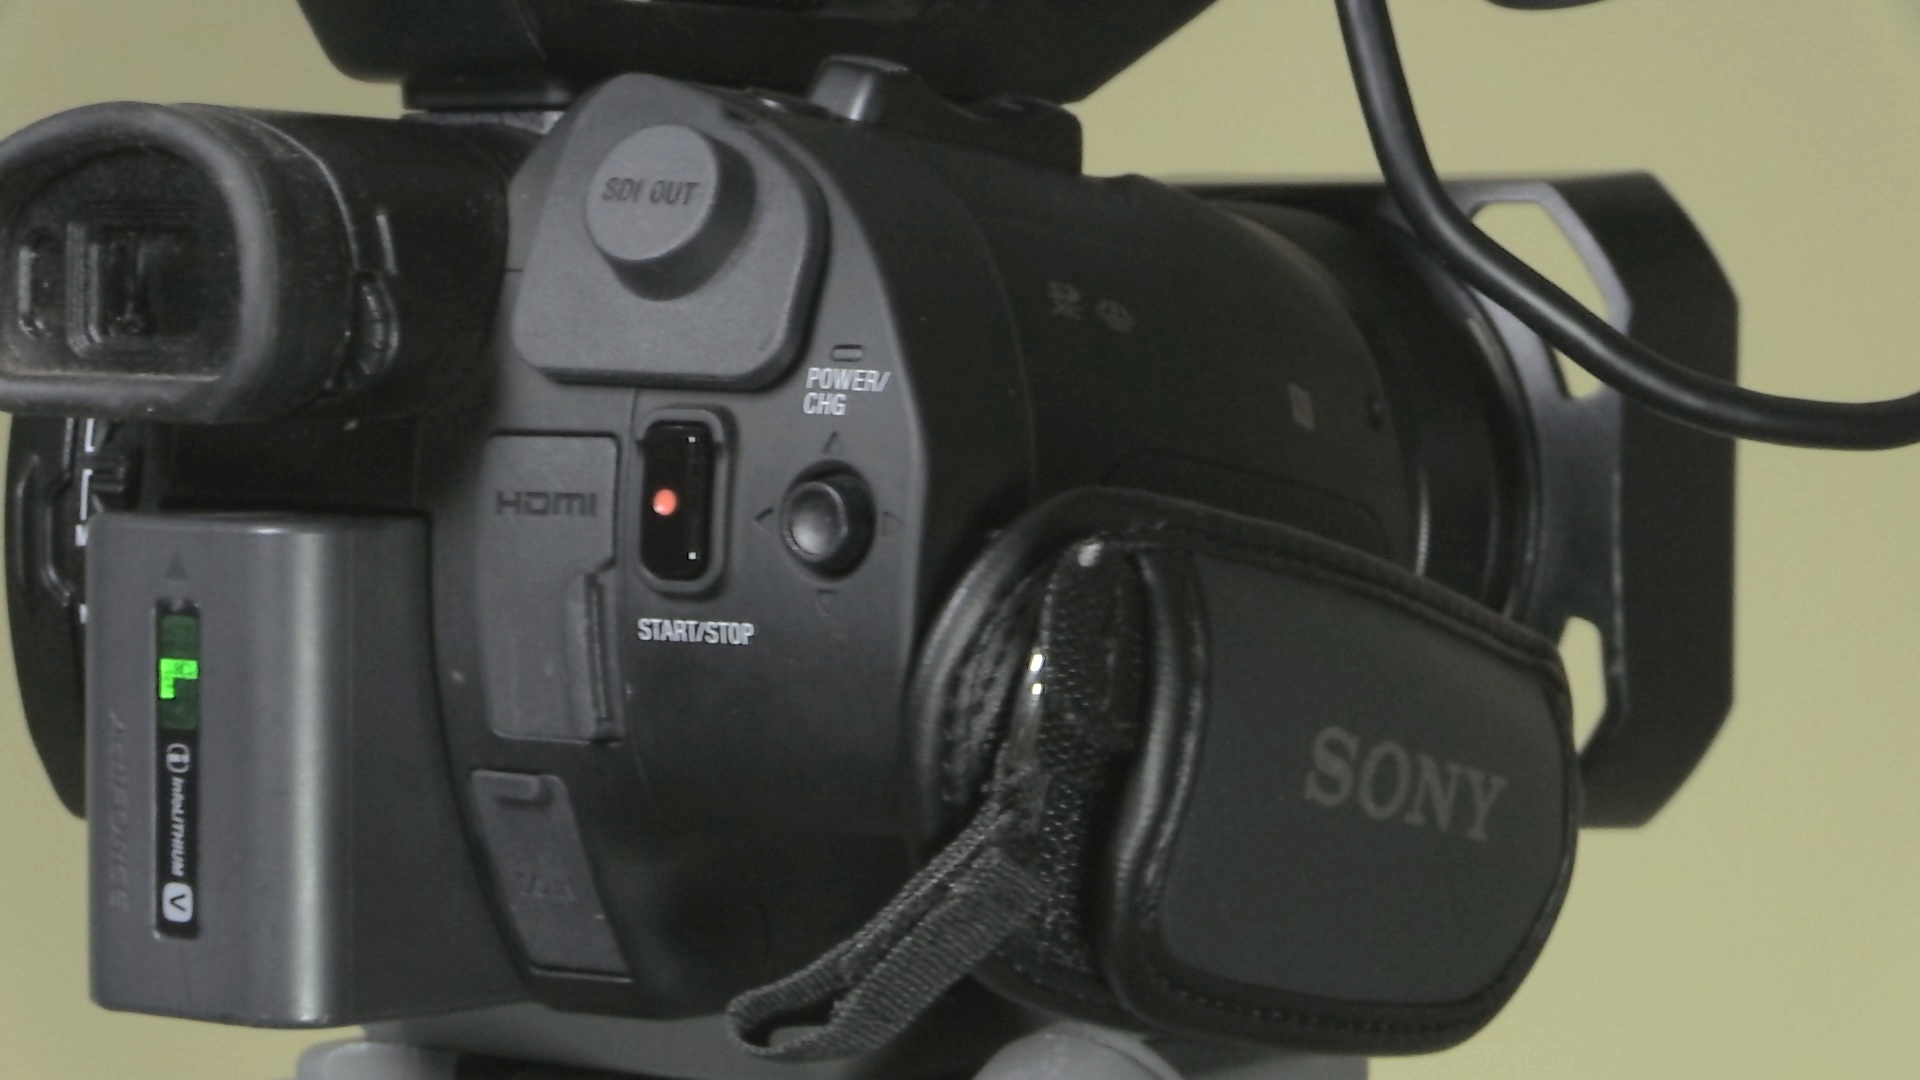 Gematigd opgraven Acrobatiek Video Review: Sony PXW-X70 camcorder – Tube Shooter